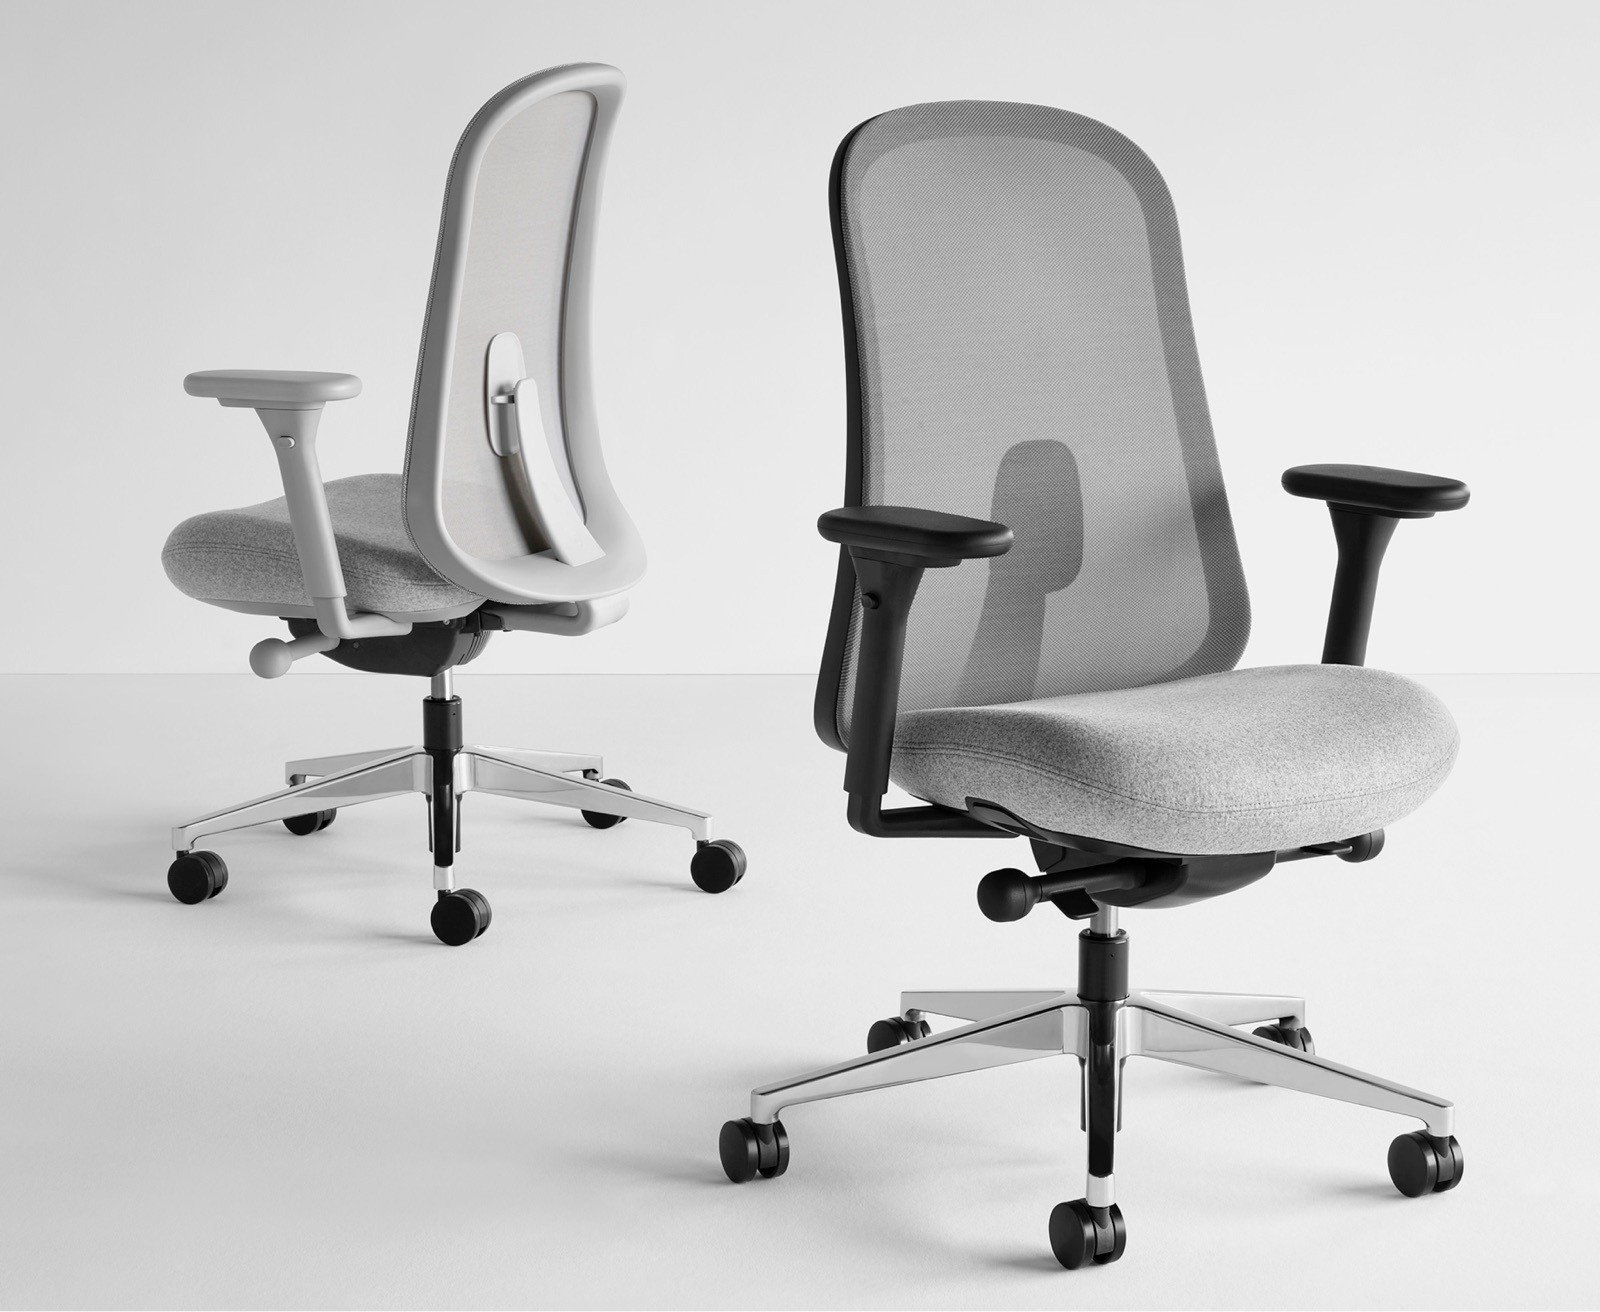 Two black and grey Lino Chairs with adjustable sacral lumbar support, viewed from the front and back at angles.